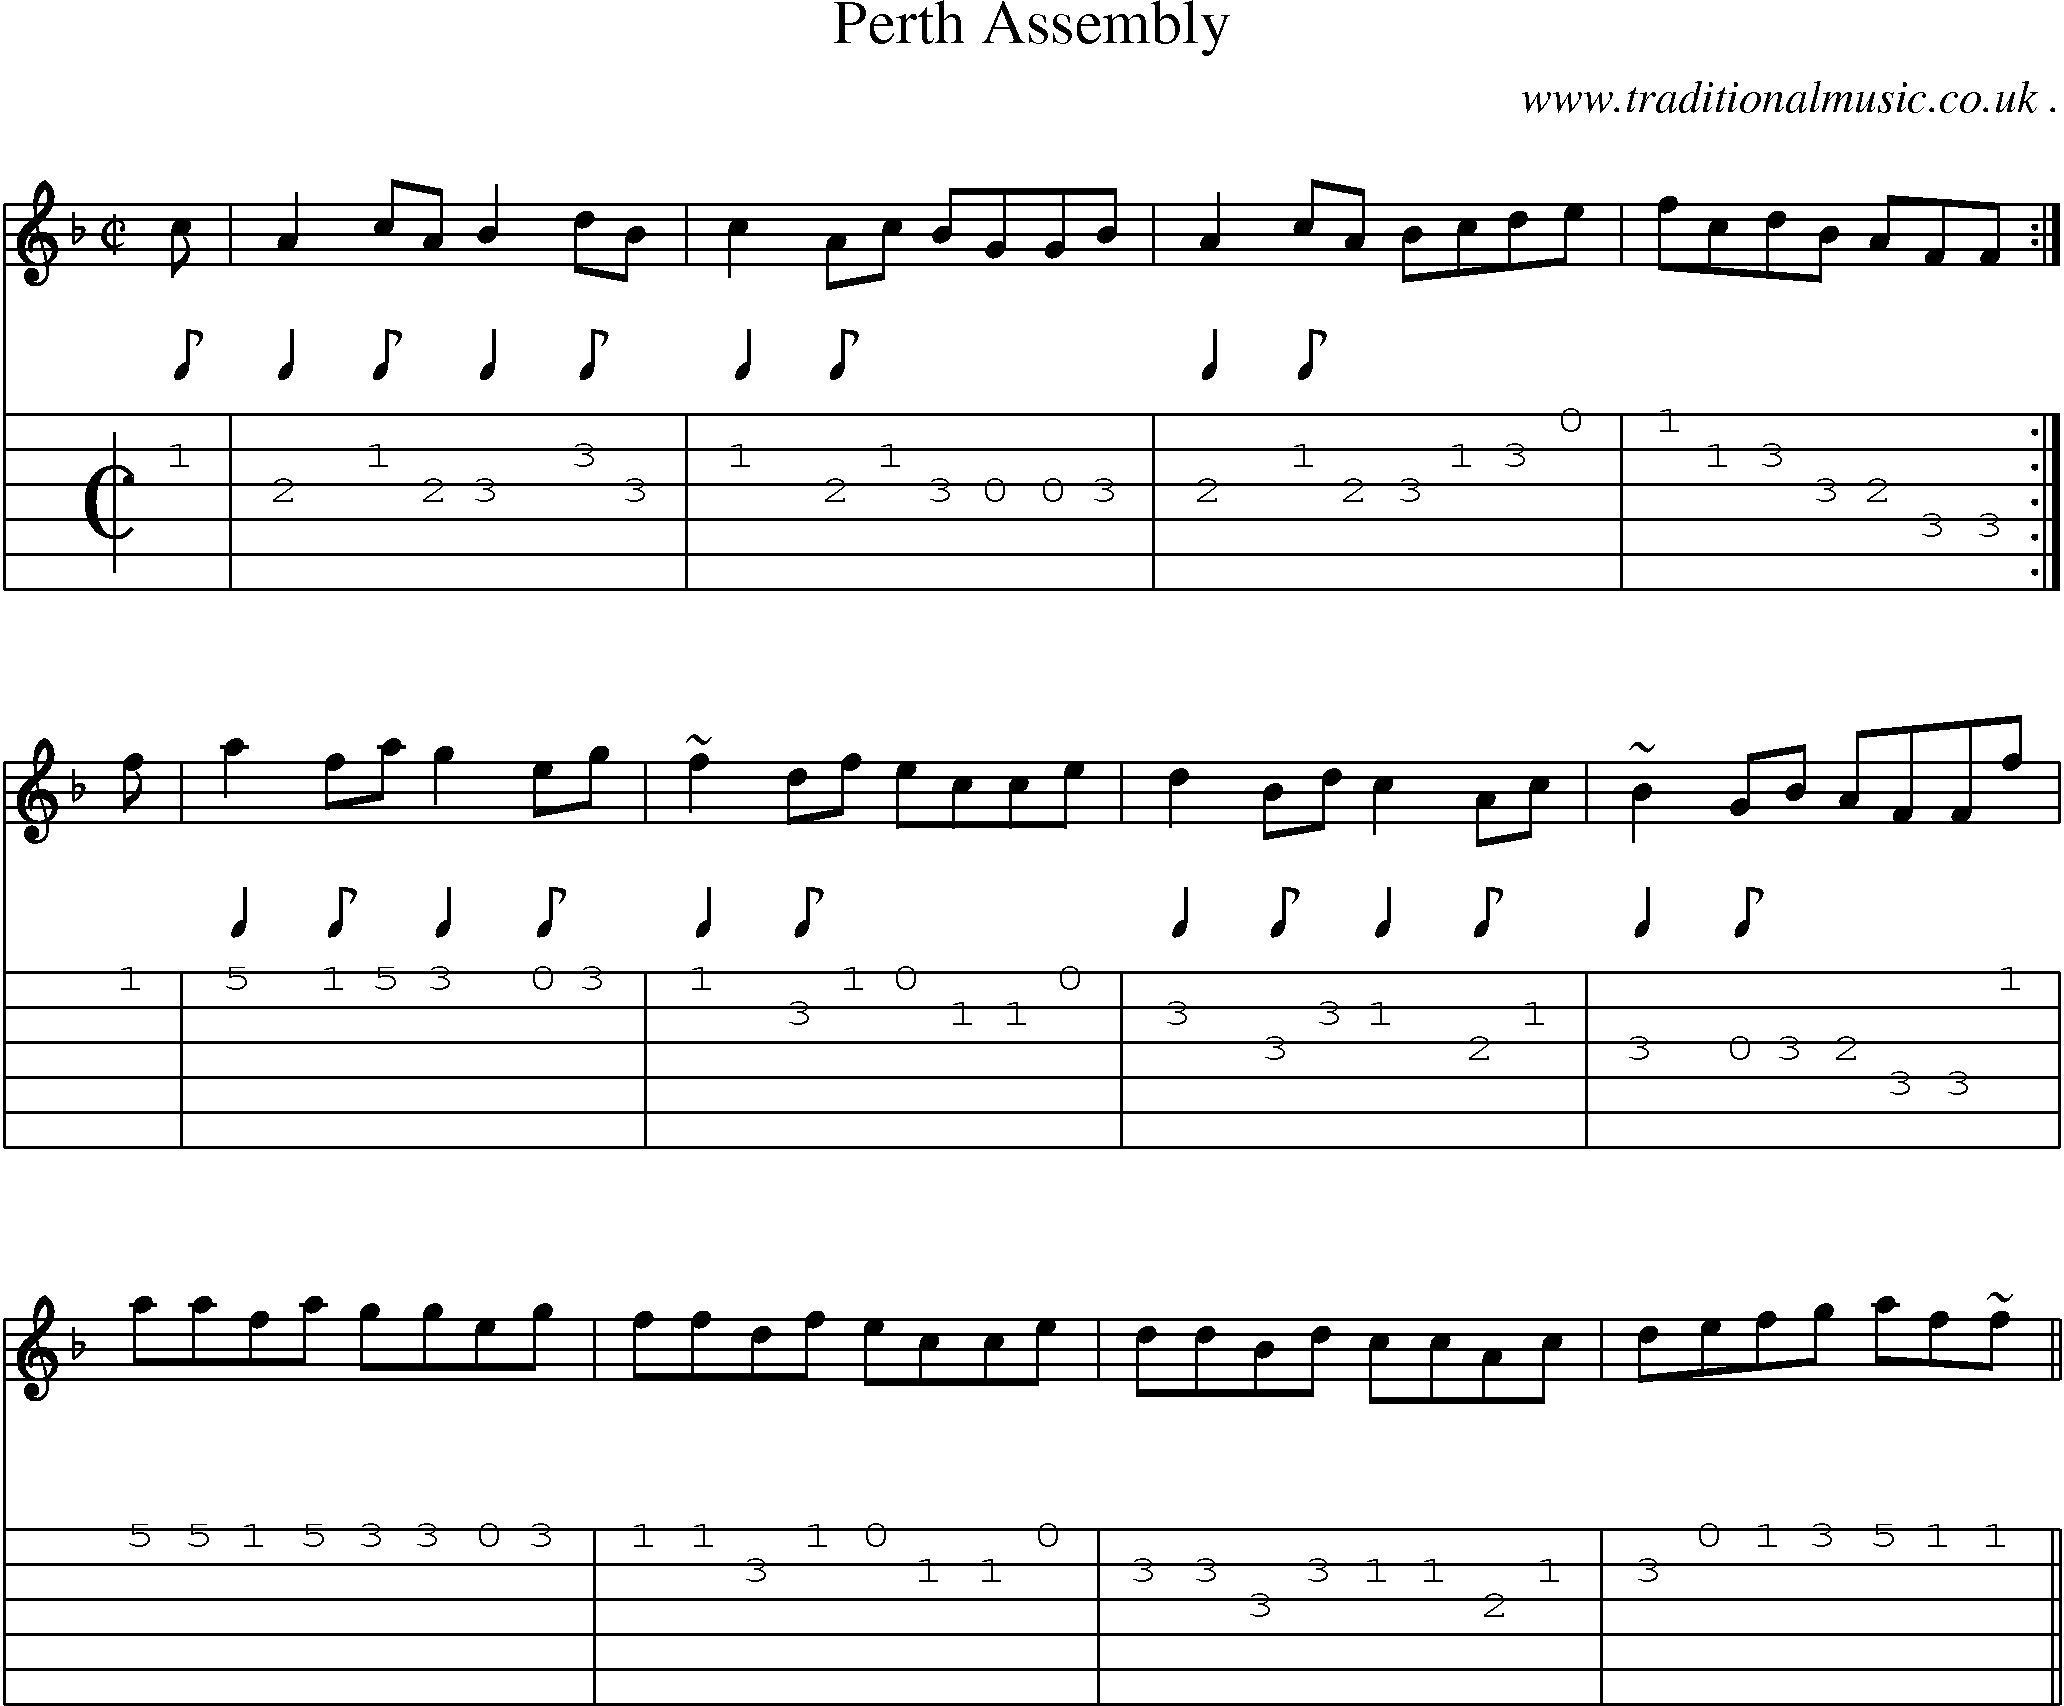 Sheet-music  score, Chords and Guitar Tabs for Perth Assembly